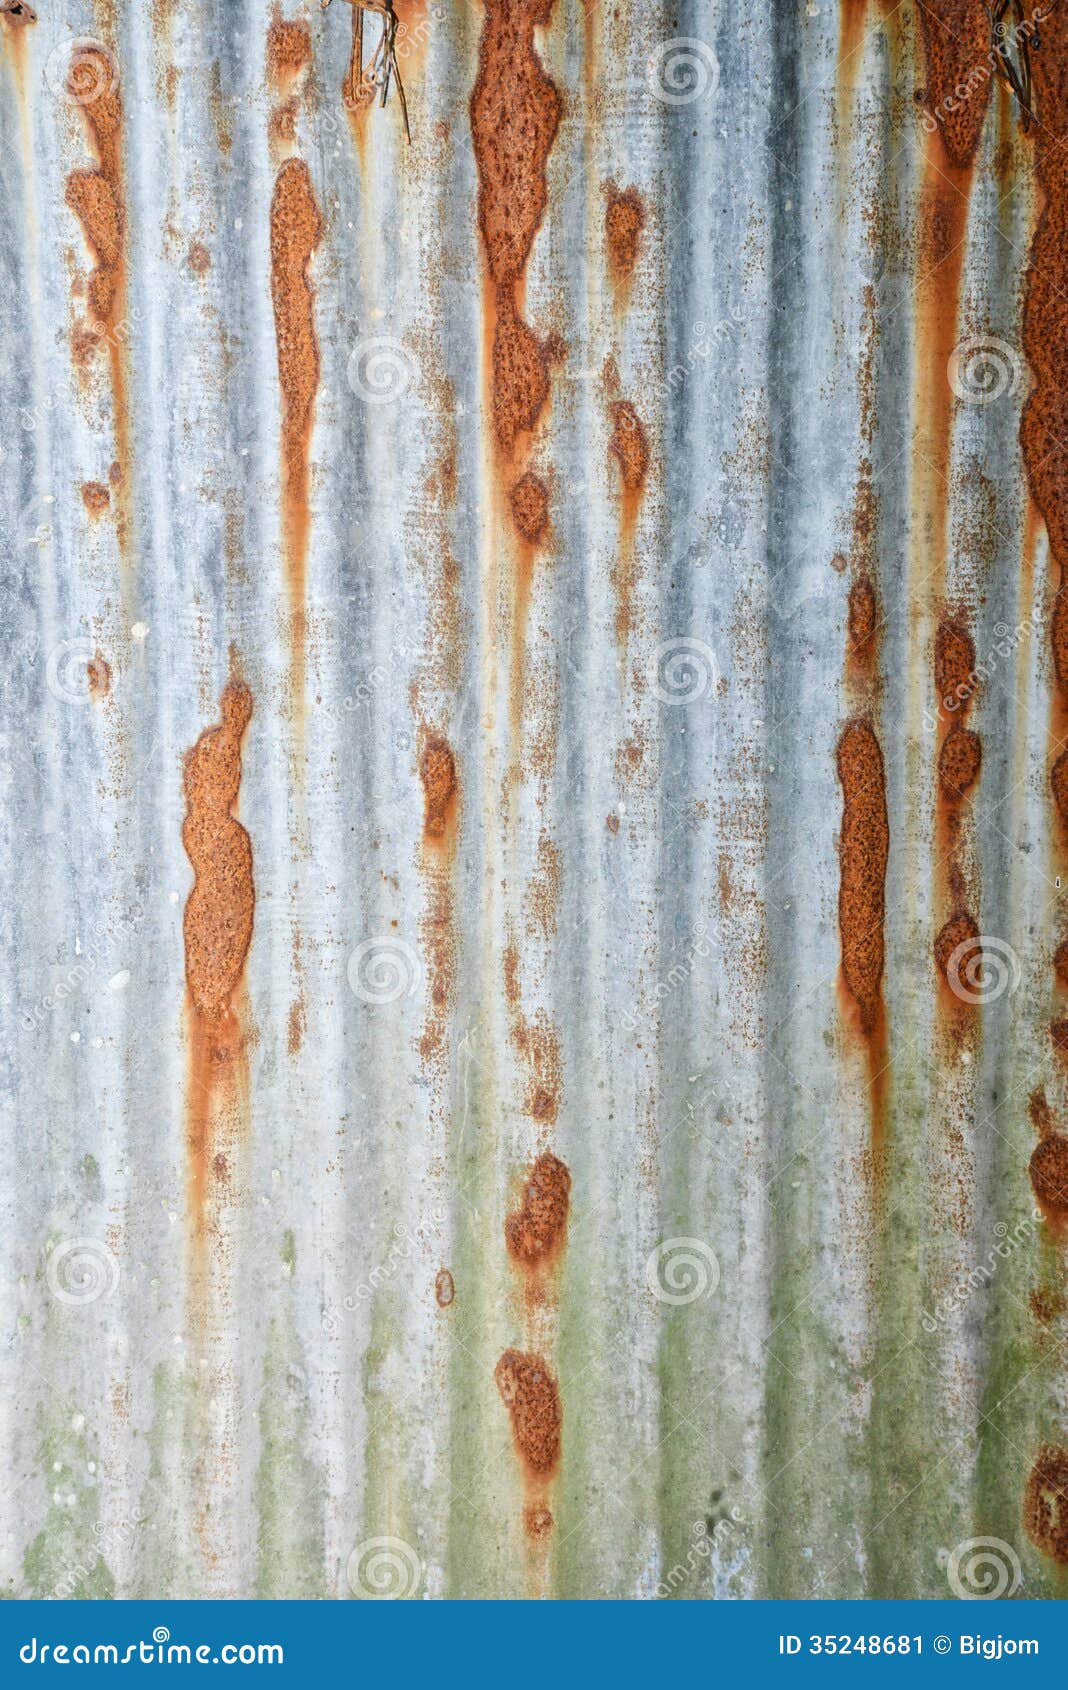 rusty corrugated metal for sale